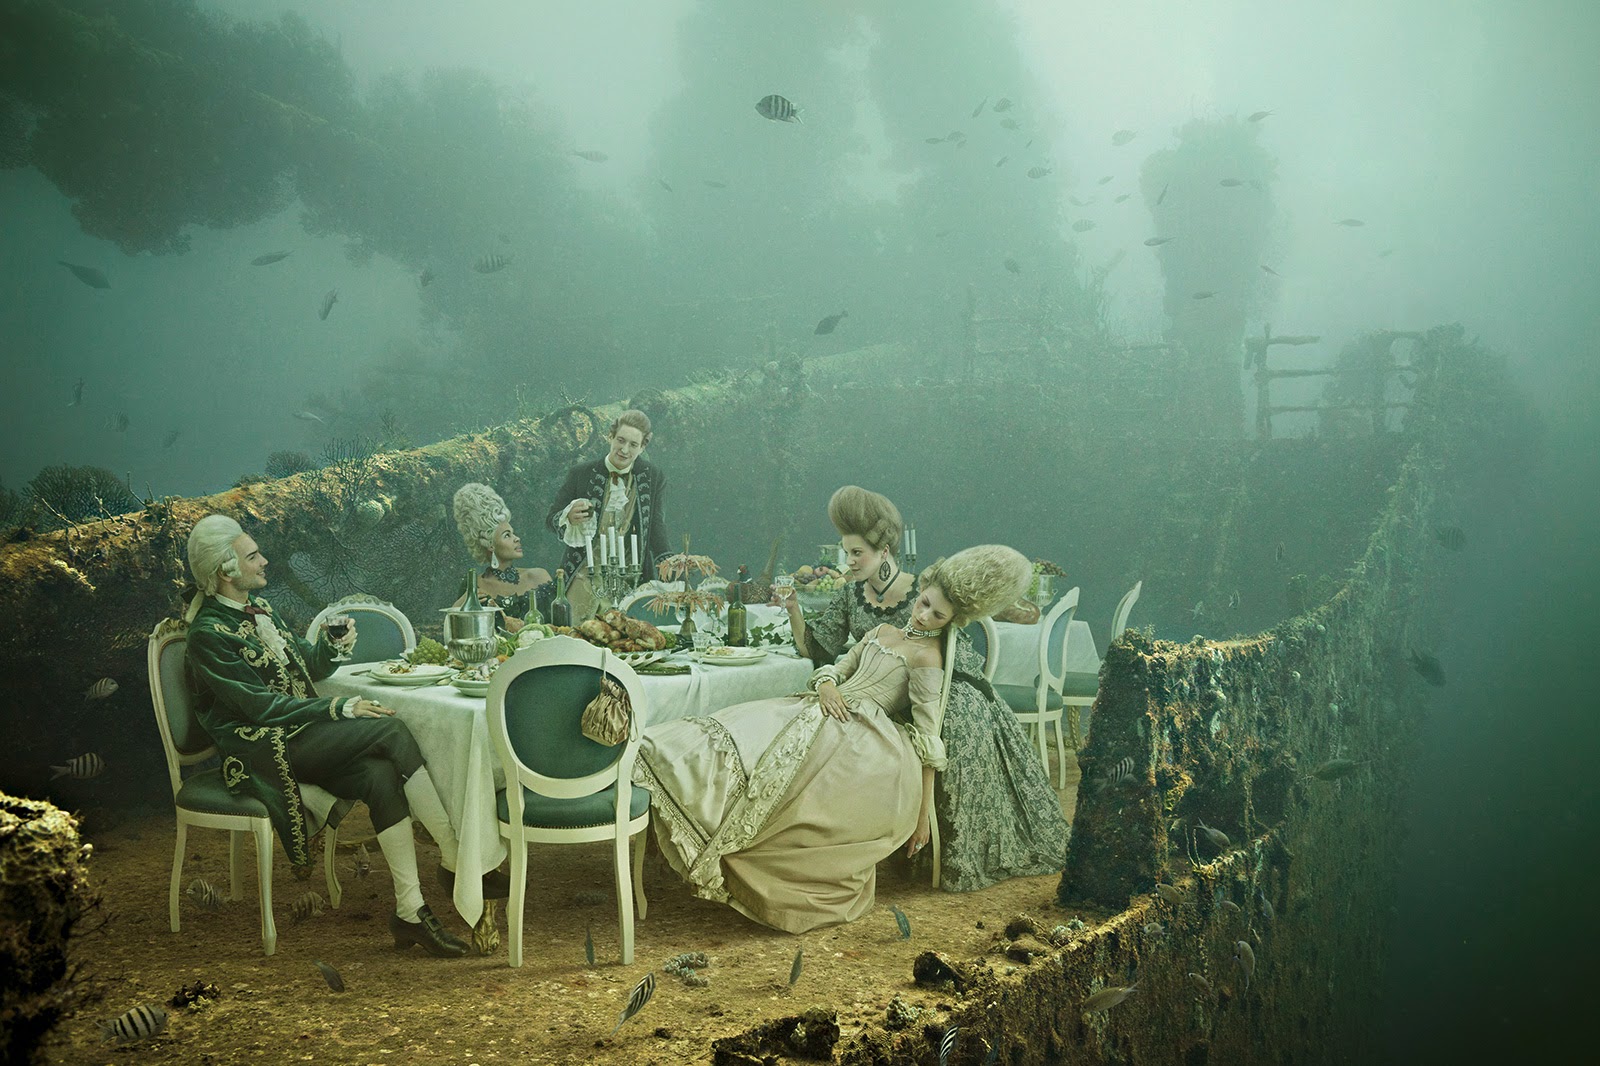 01-Andreas-Franke-Surreal-Artificial-Reef-Photography-www-designstack-co